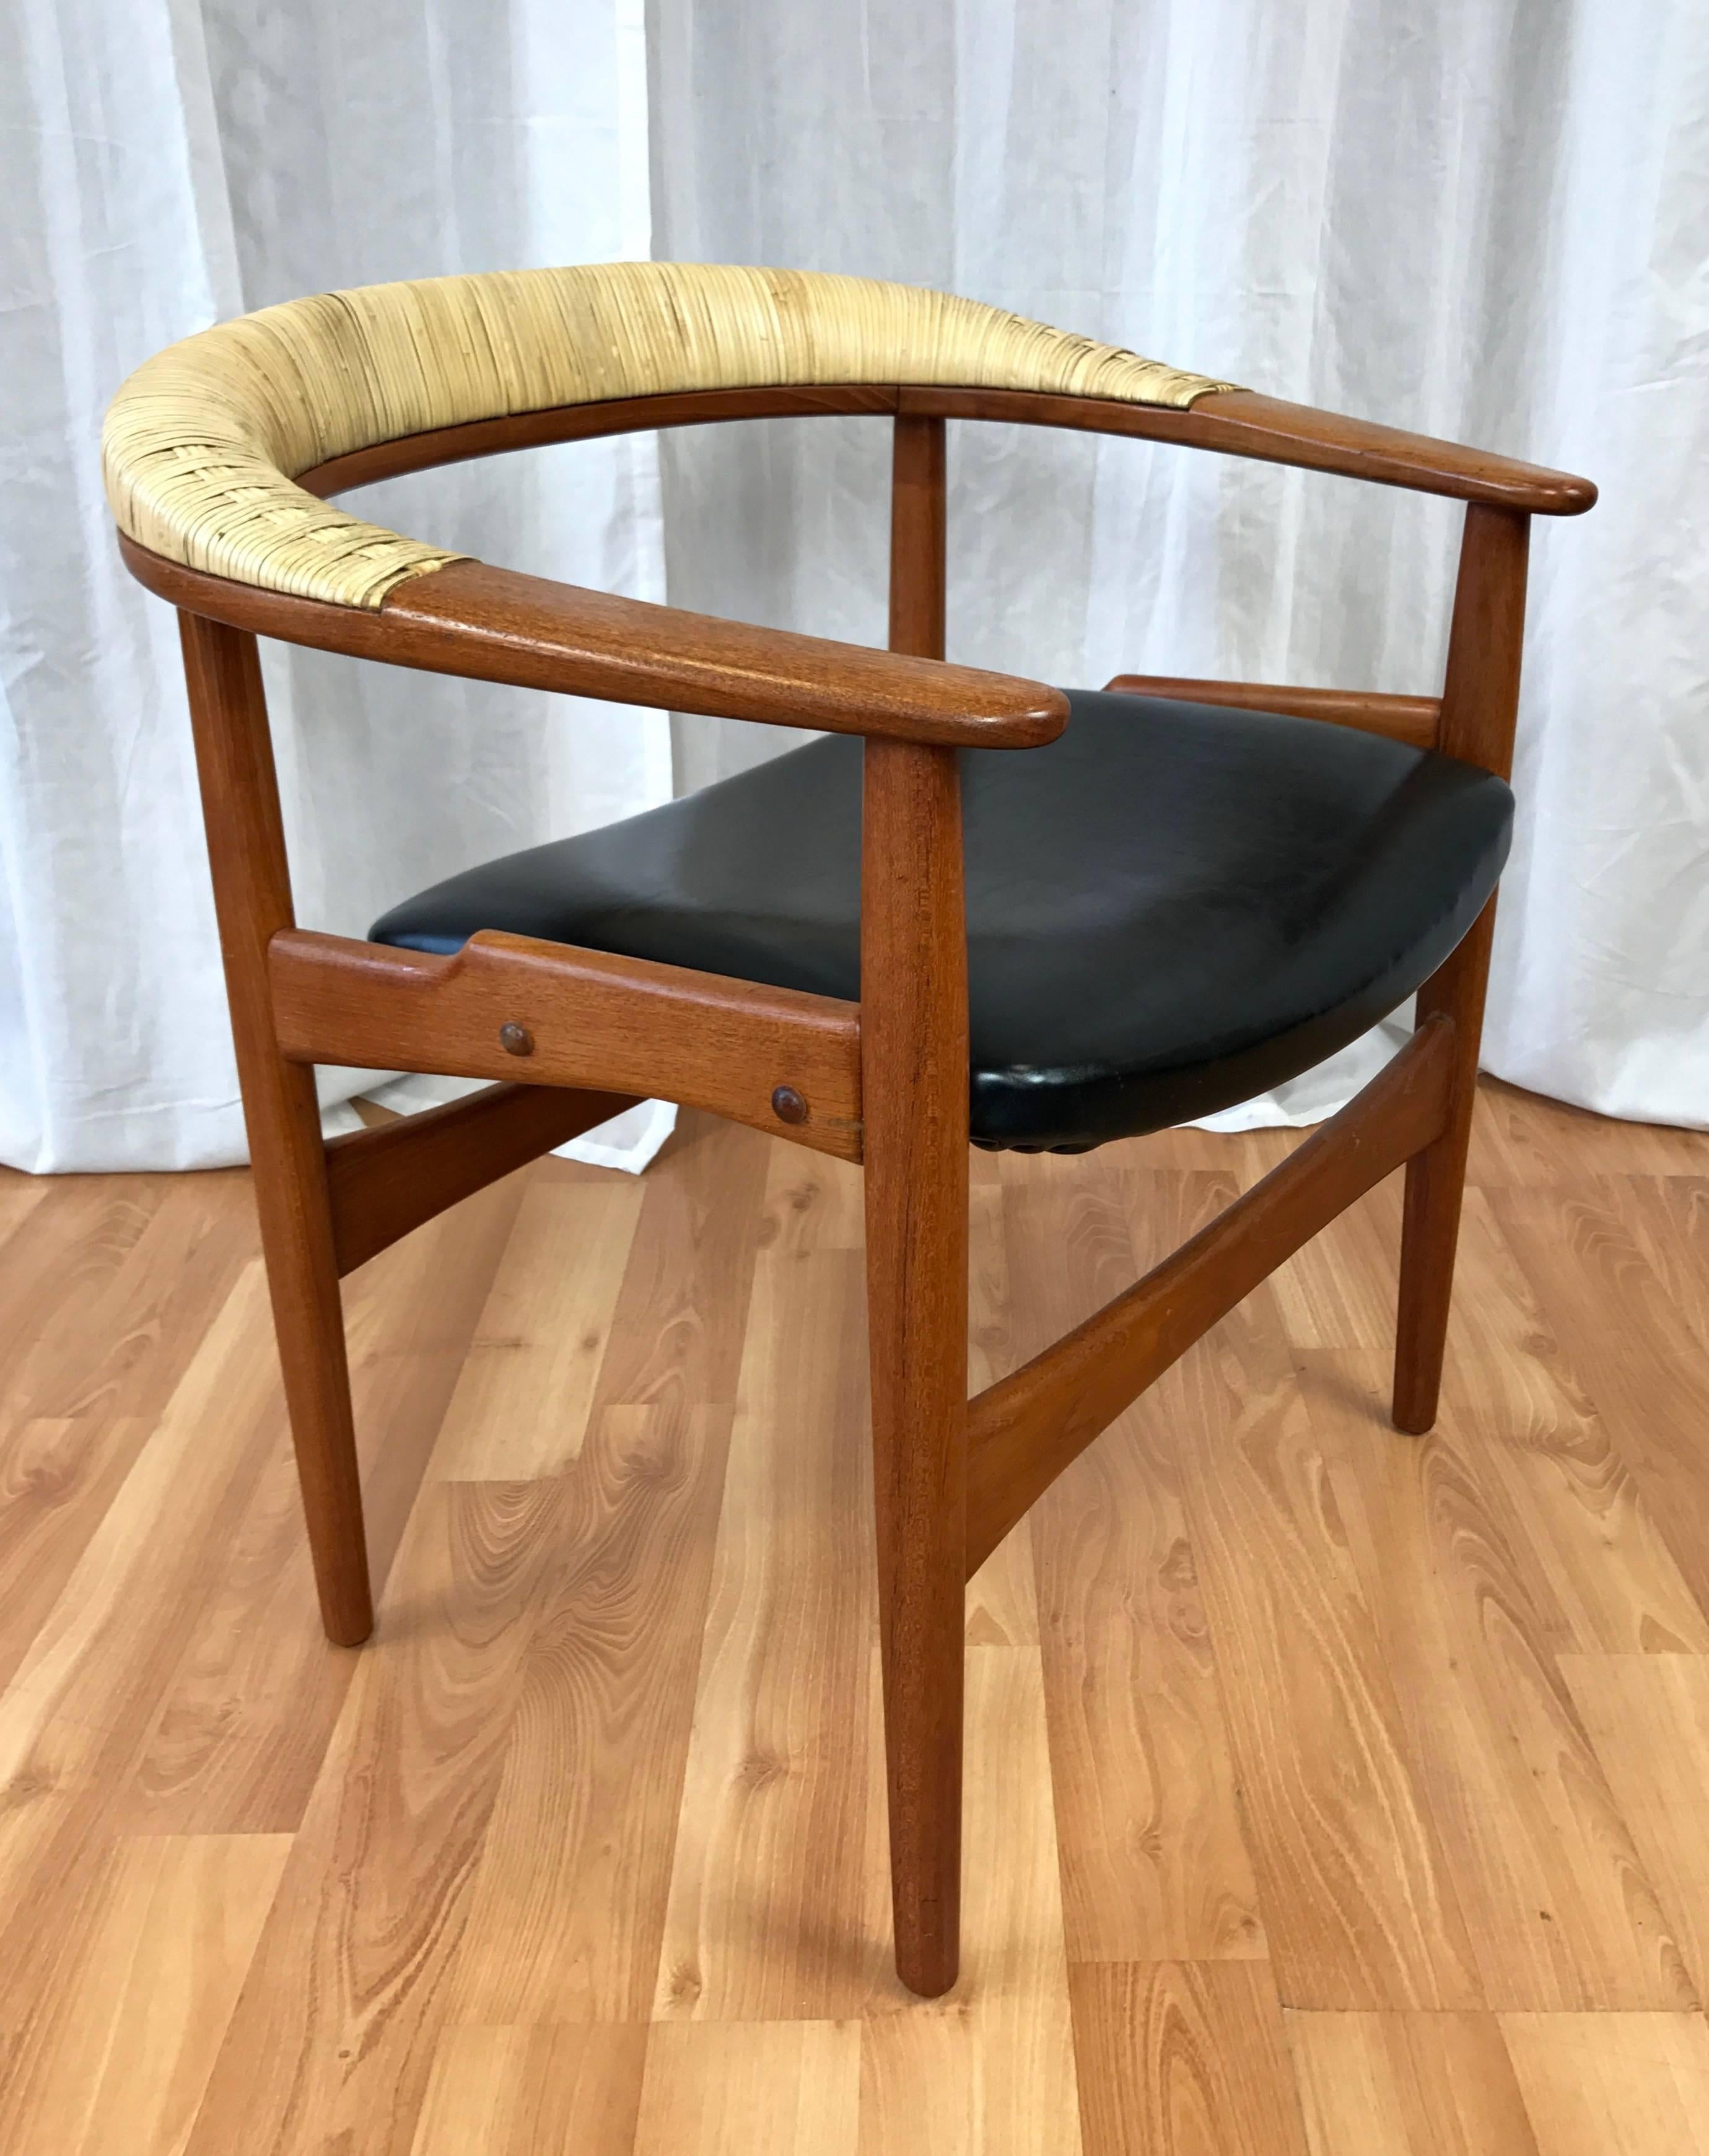 A rare Danish Modern teak armchair with cane-wrapped back and faux-leather seat by Arne Hovmand-Olsen.

Wide teak frame is defined by a substantial sweeping backrest inset with original wrapped and woven natural cane. Generous seat is upholstered